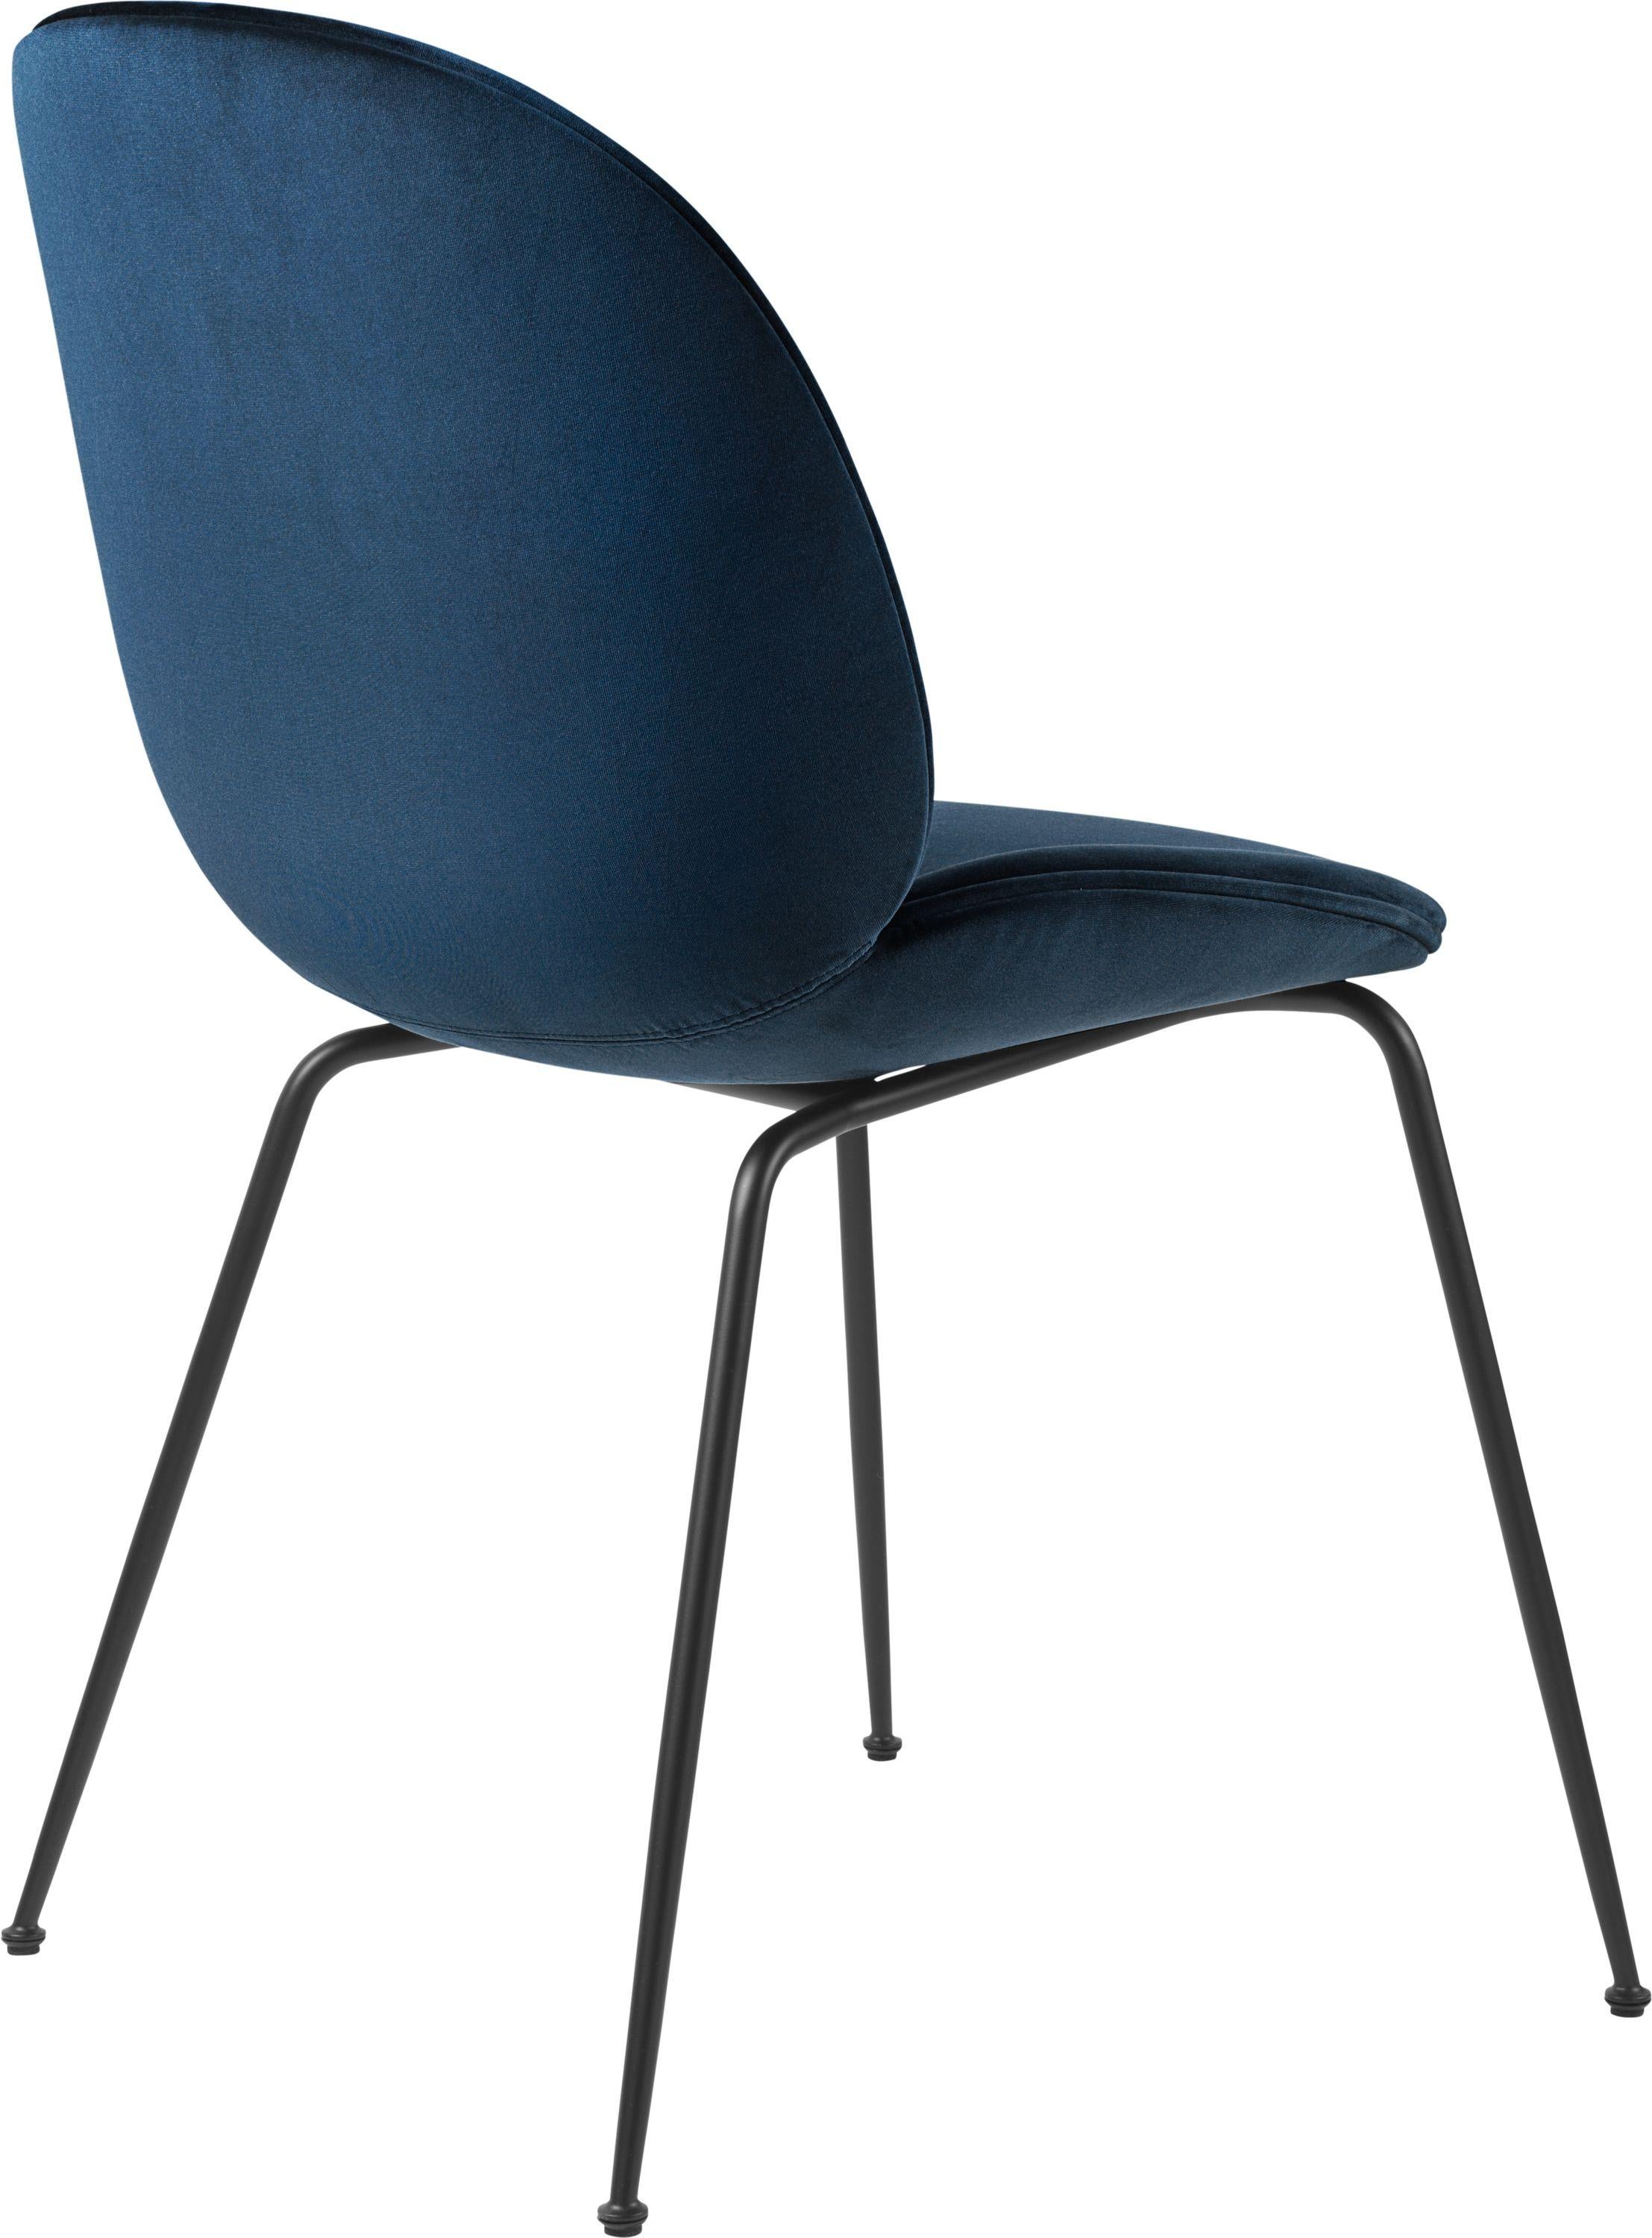 GamFratesi 'Beetle' dining chair in blue with conic base. Designed by Danish-Italian design-duo GamFratesi in 2013. Due to its appealing design, outstanding comfort, and unique customization possibilities, the dining chair has found a home in some